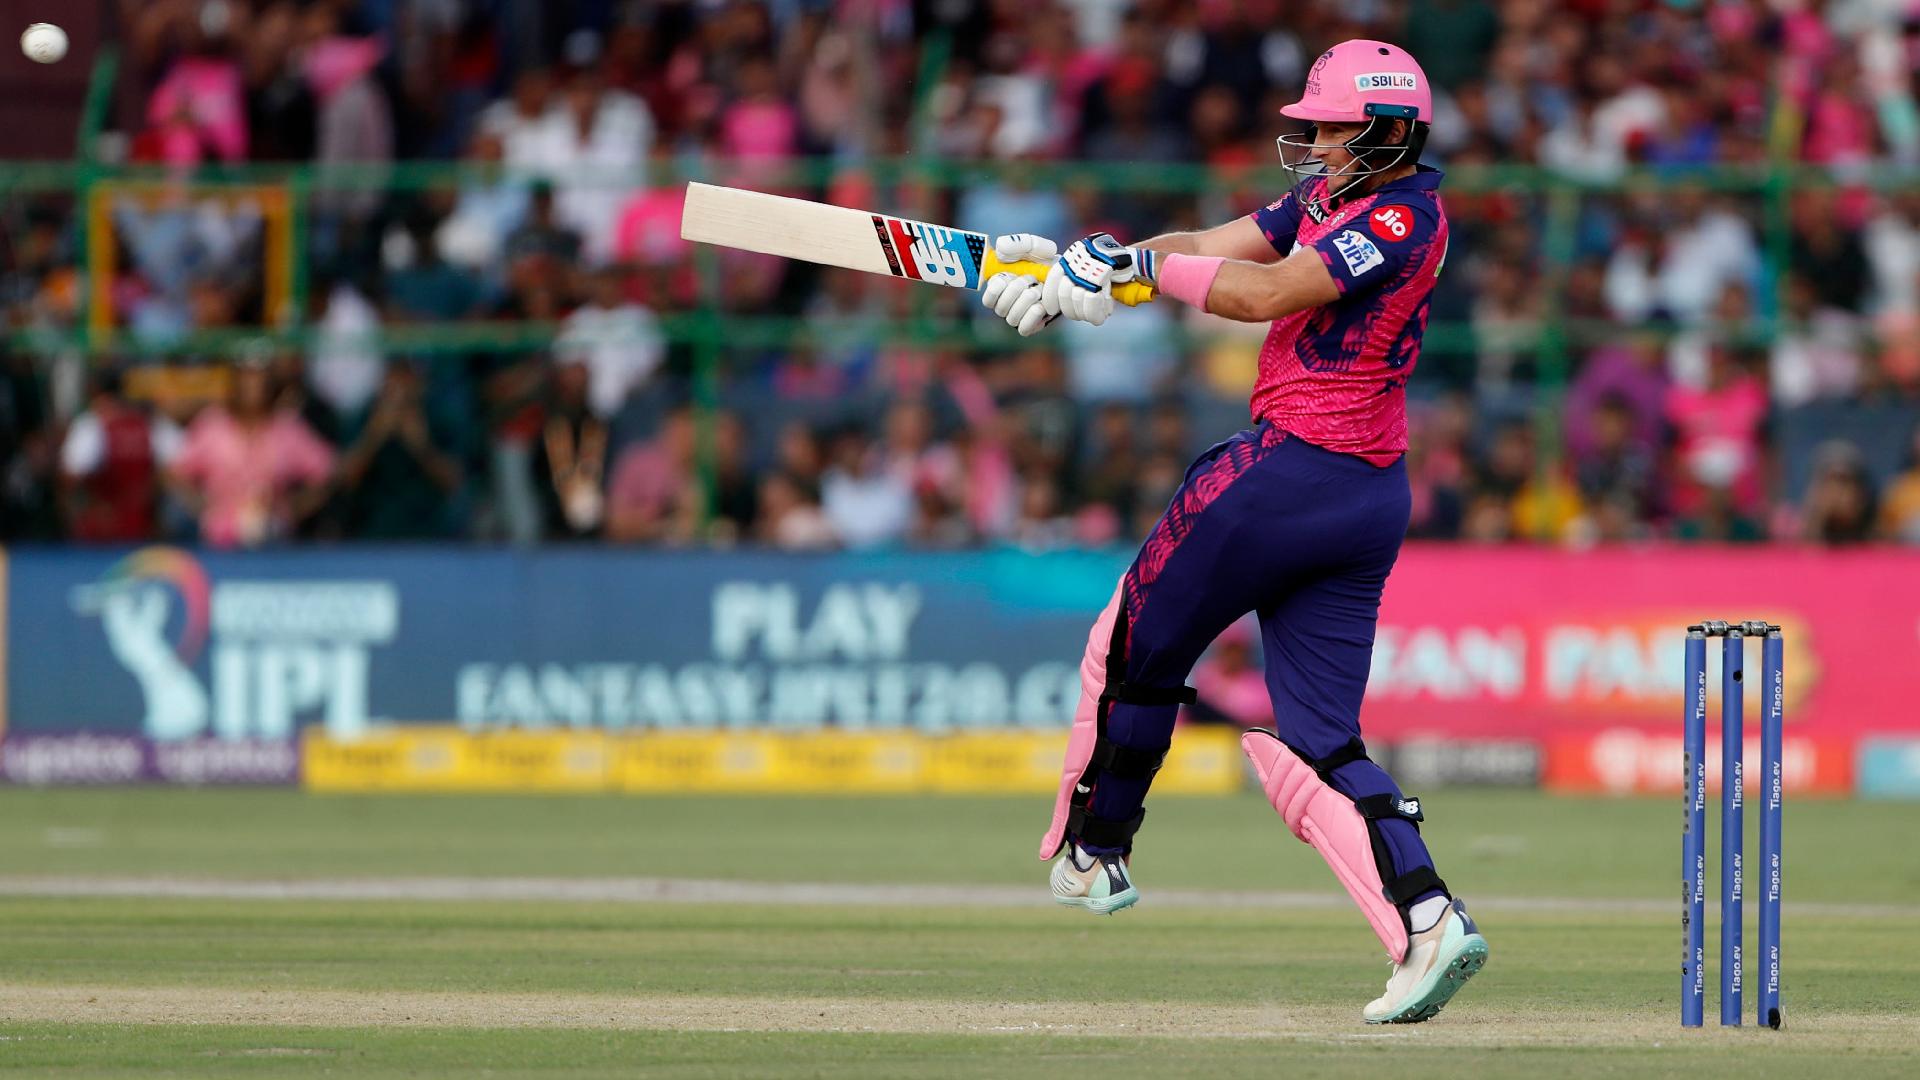 Joe Root out for 10 in maiden IPL innings